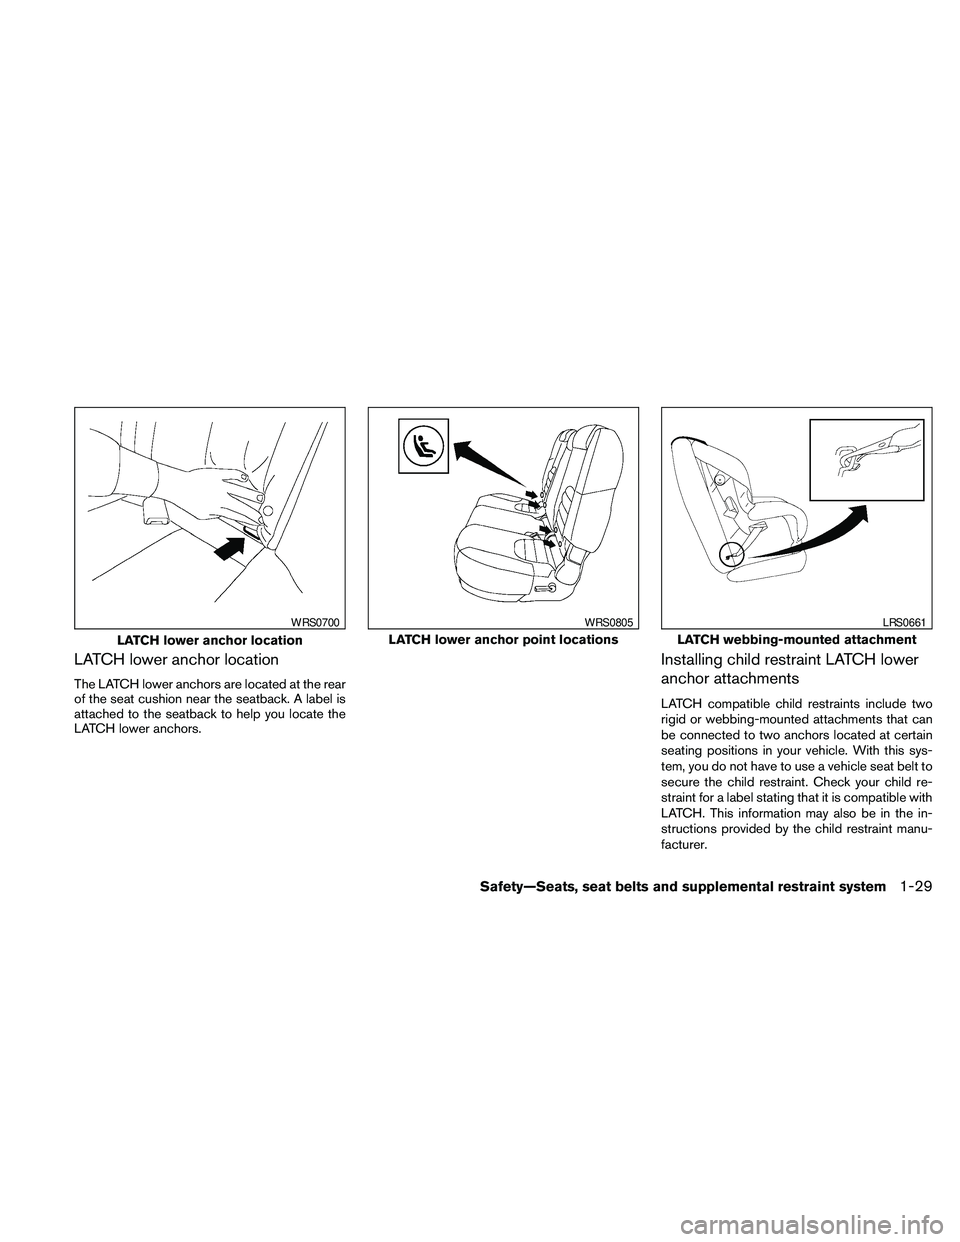 NISSAN PATHFINDER 2010  Owner´s Manual LATCH lower anchor location
The LATCH lower anchors are located at the rear
of the seat cushion near the seatback. A label is
attached to the seatback to help you locate the
LATCH lower anchors.
Insta